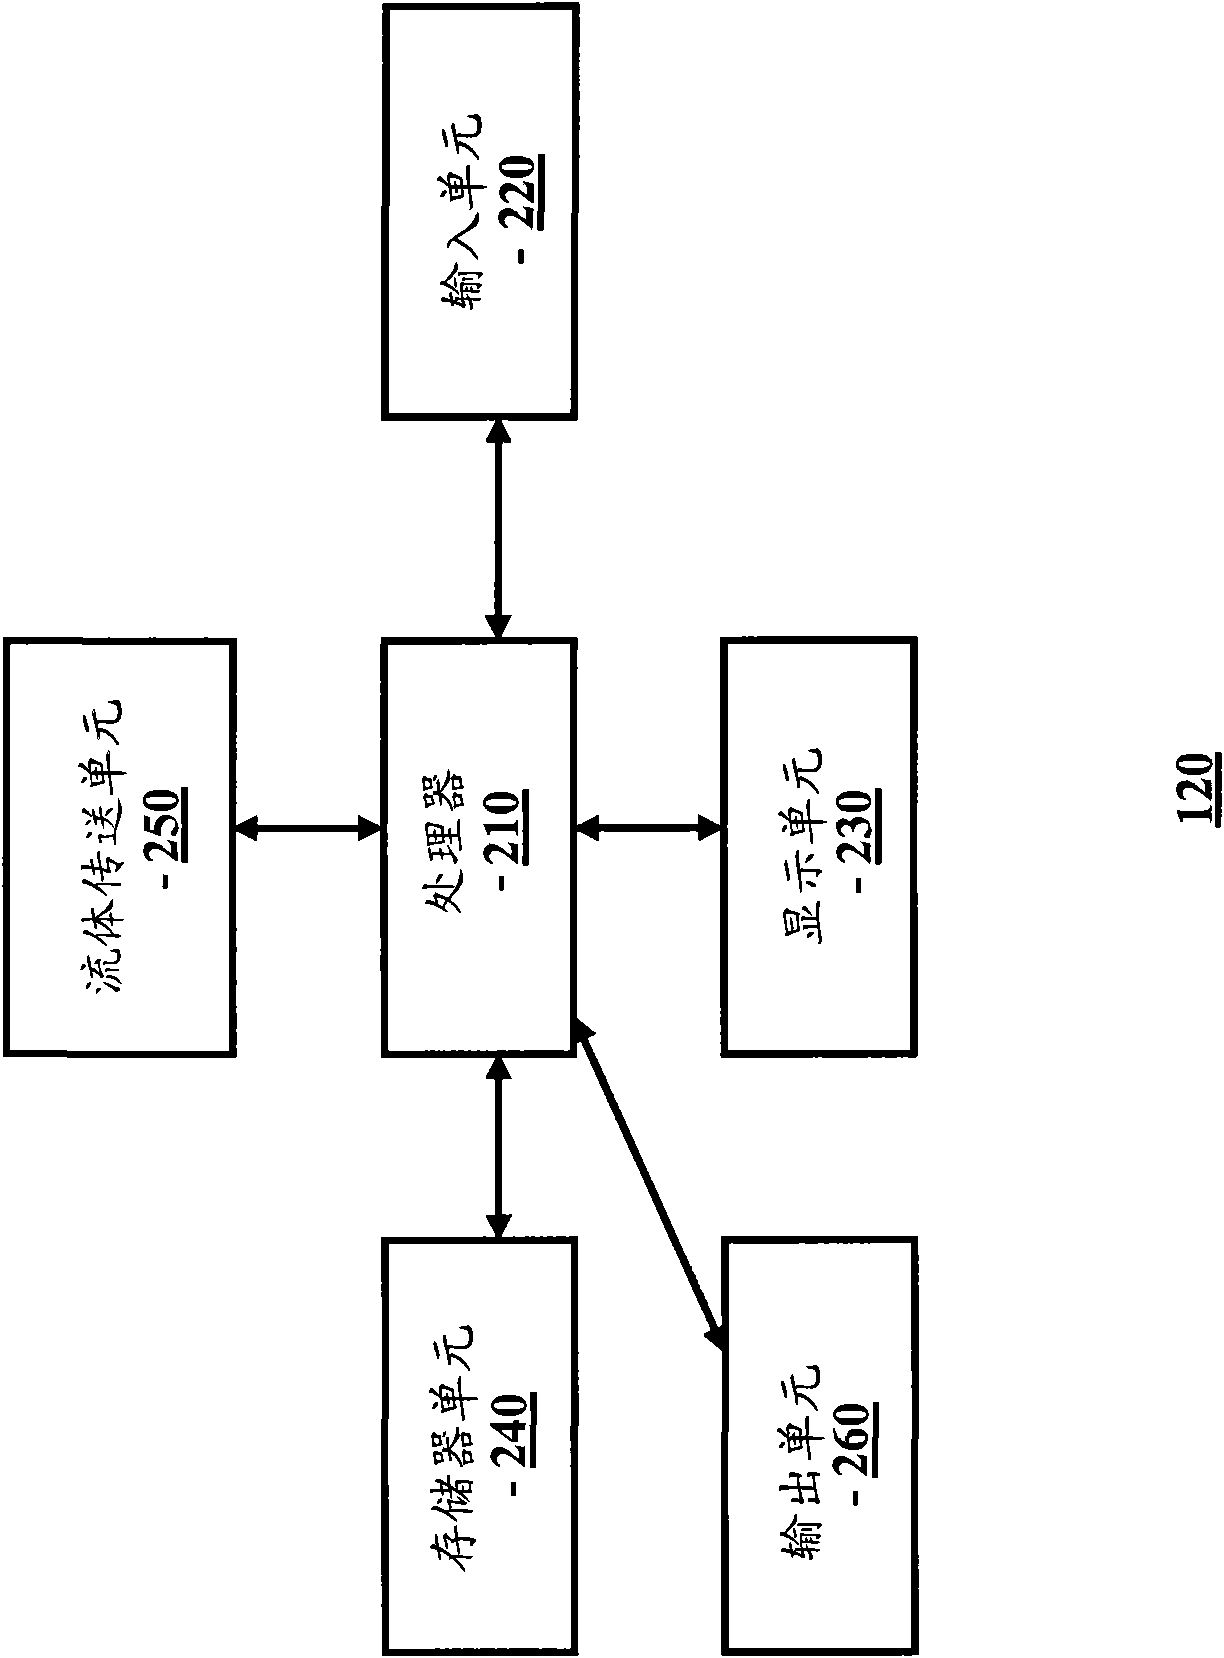 Device and method for automatic data acquisition and/or detection